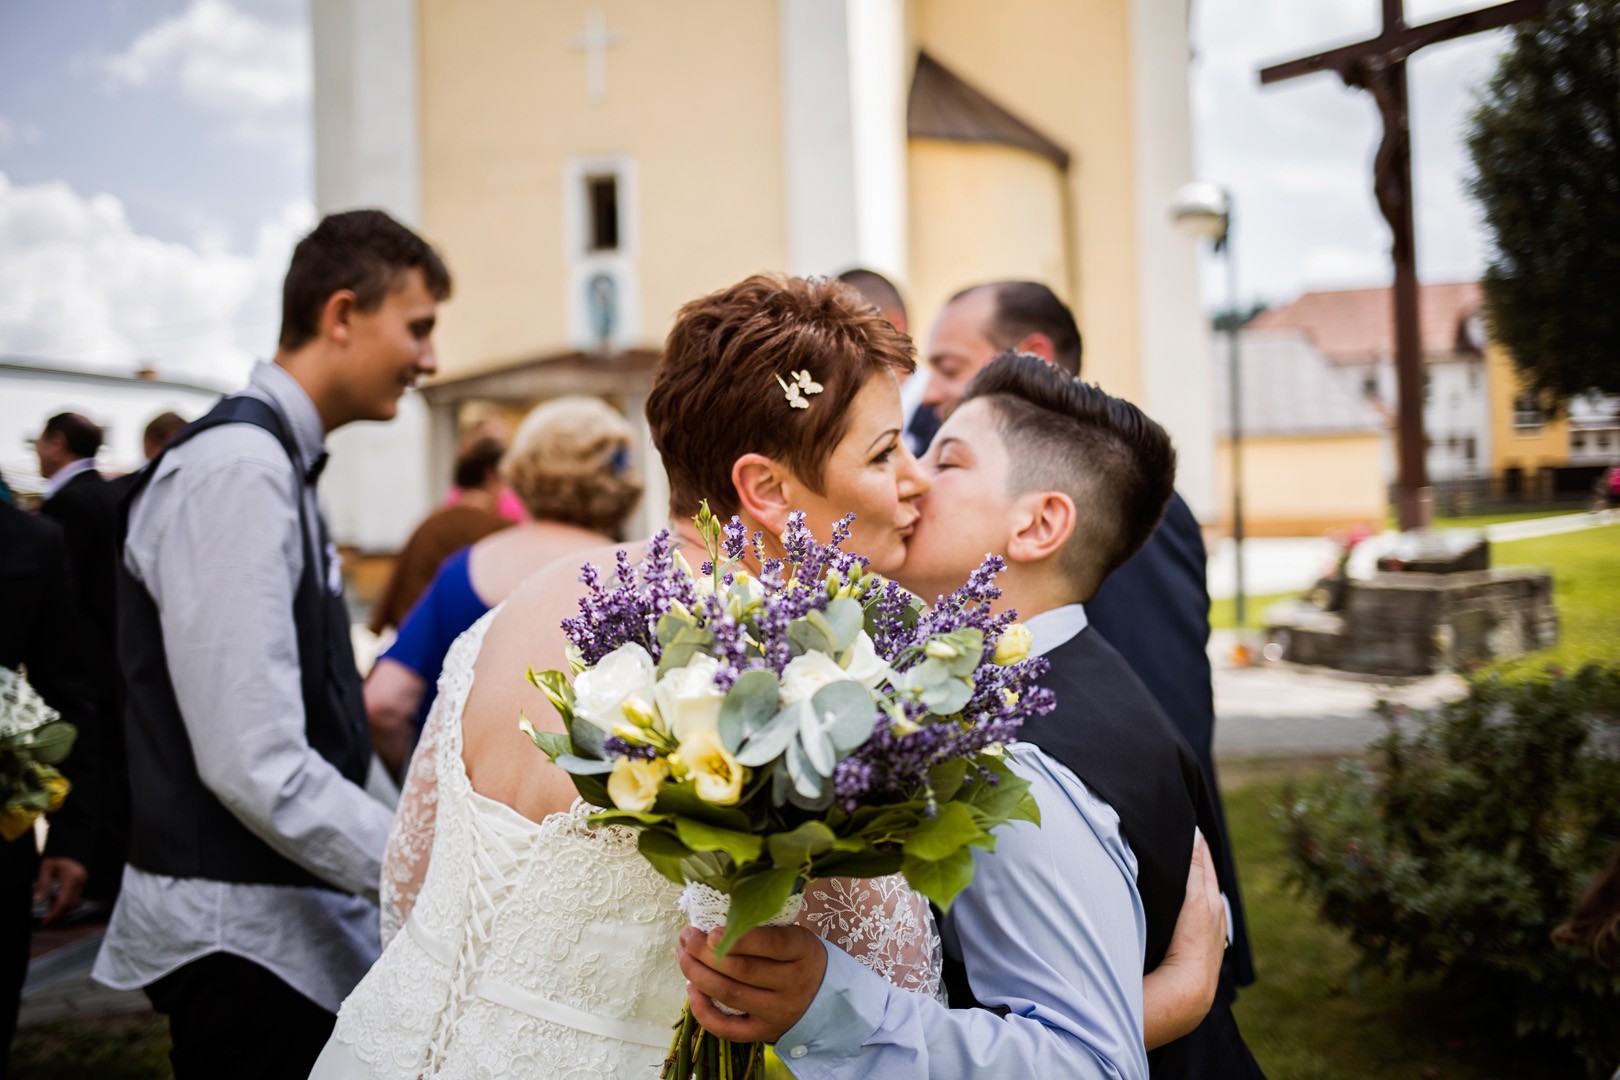 Wedding photos from the Slovak-Italian wedding of Mirka and Baldy in the beautiful surroundings of the Gbeľany Manor House - 0126.jpg